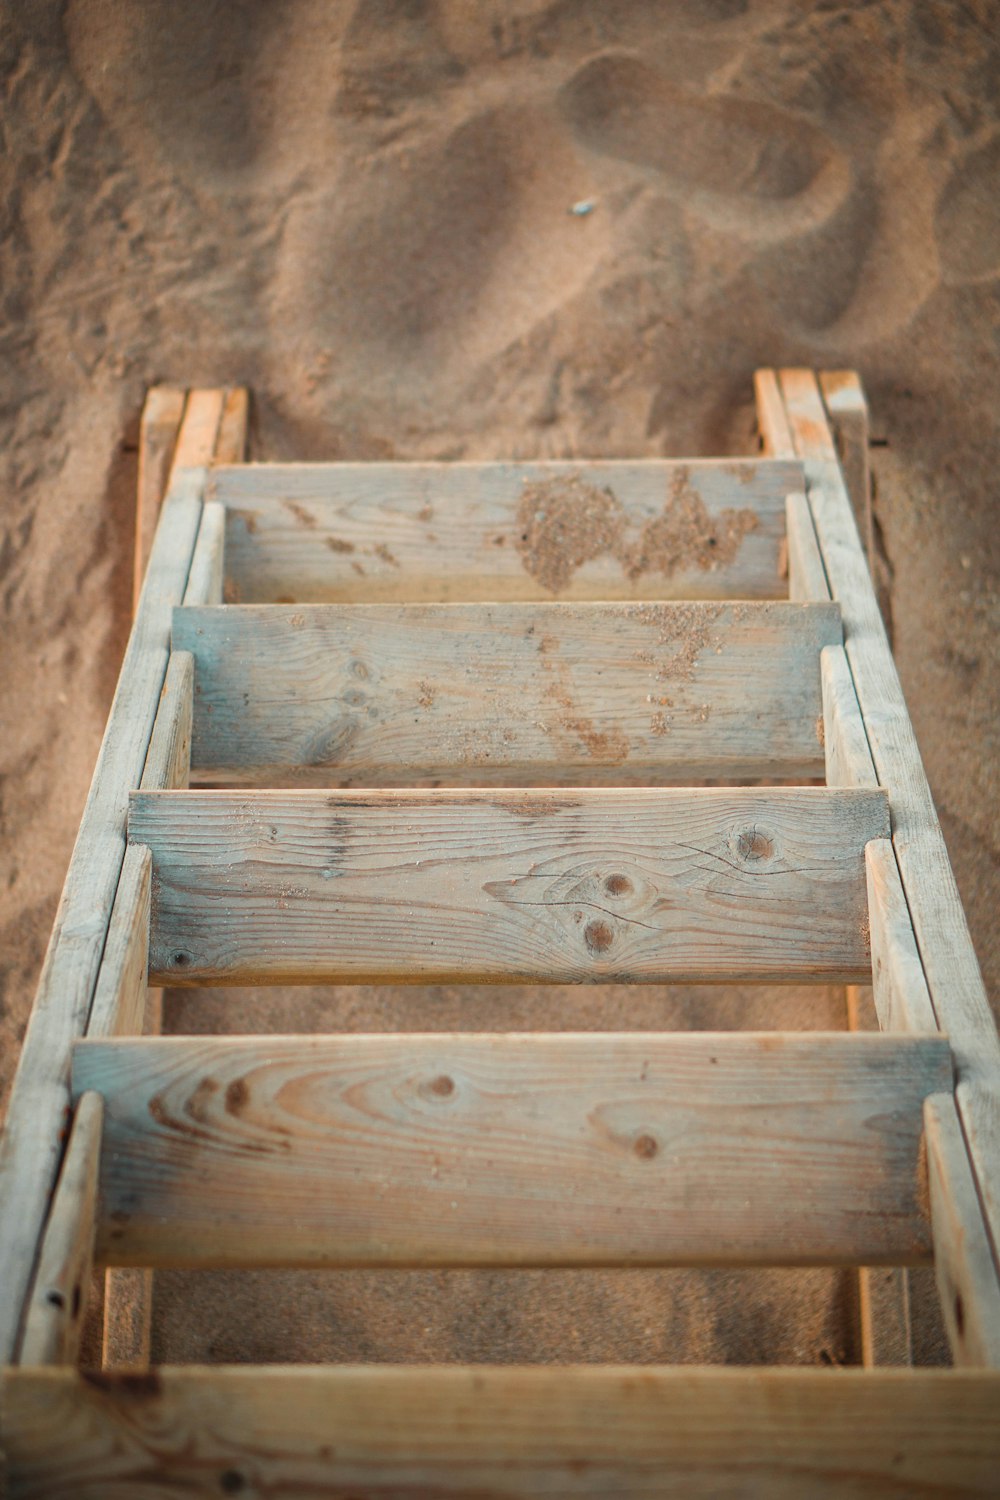 a close up of a wooden structure in the sand